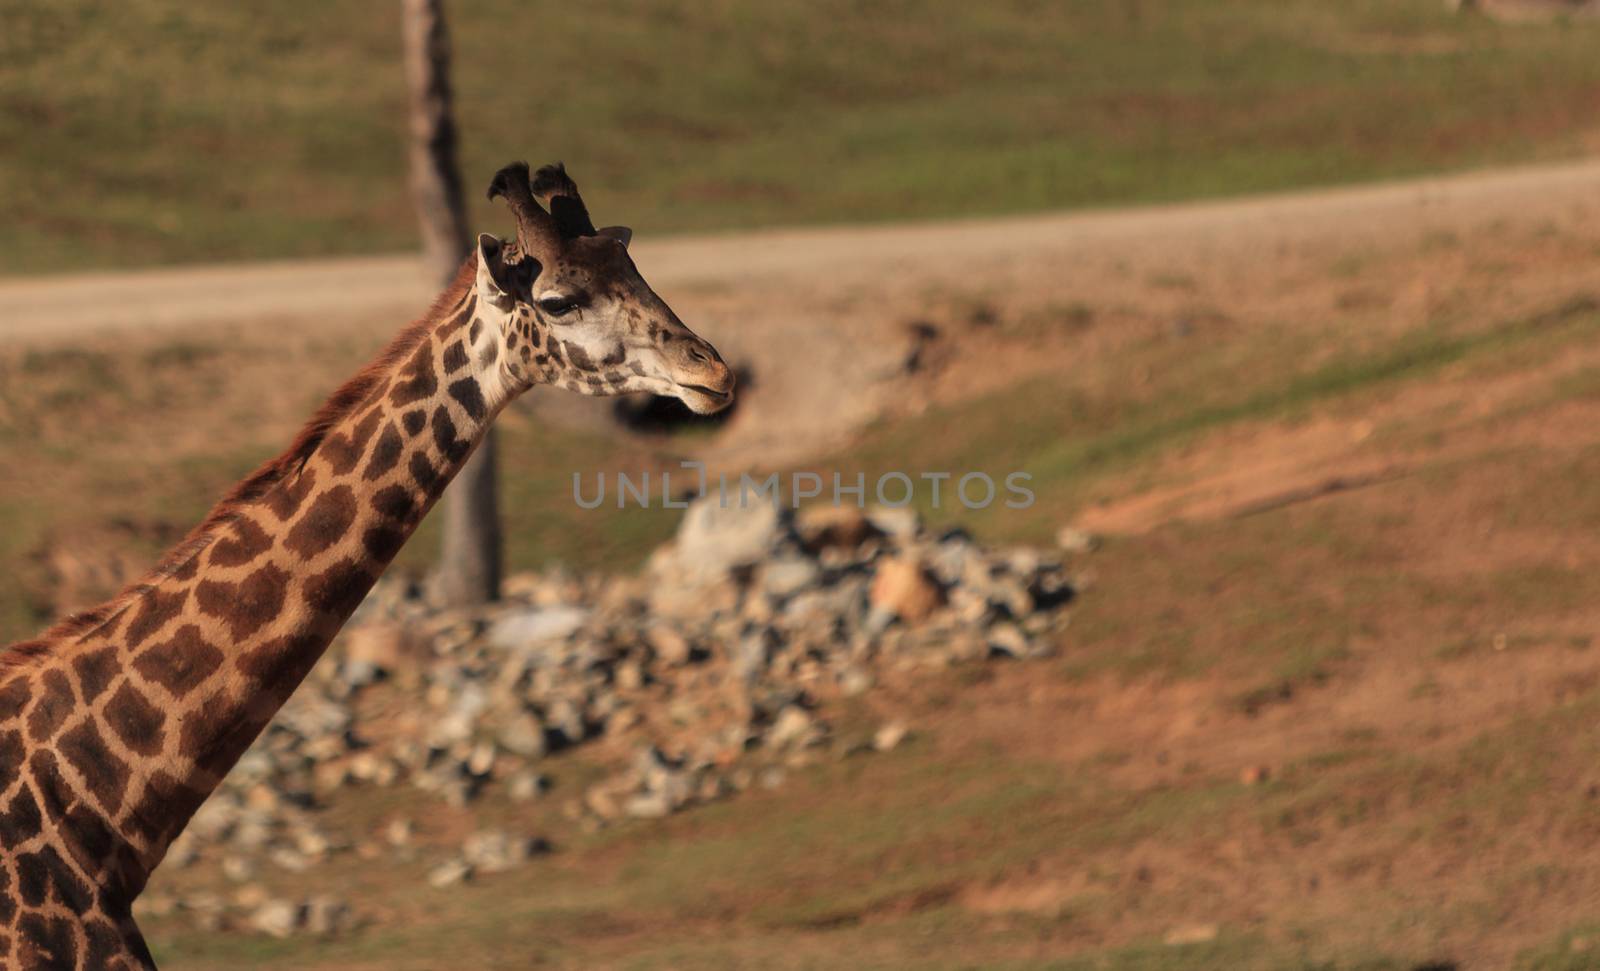 Giraffes, Giraffa camelopardalis, are found in Africa have long necks to help them eat the leaves off trees.